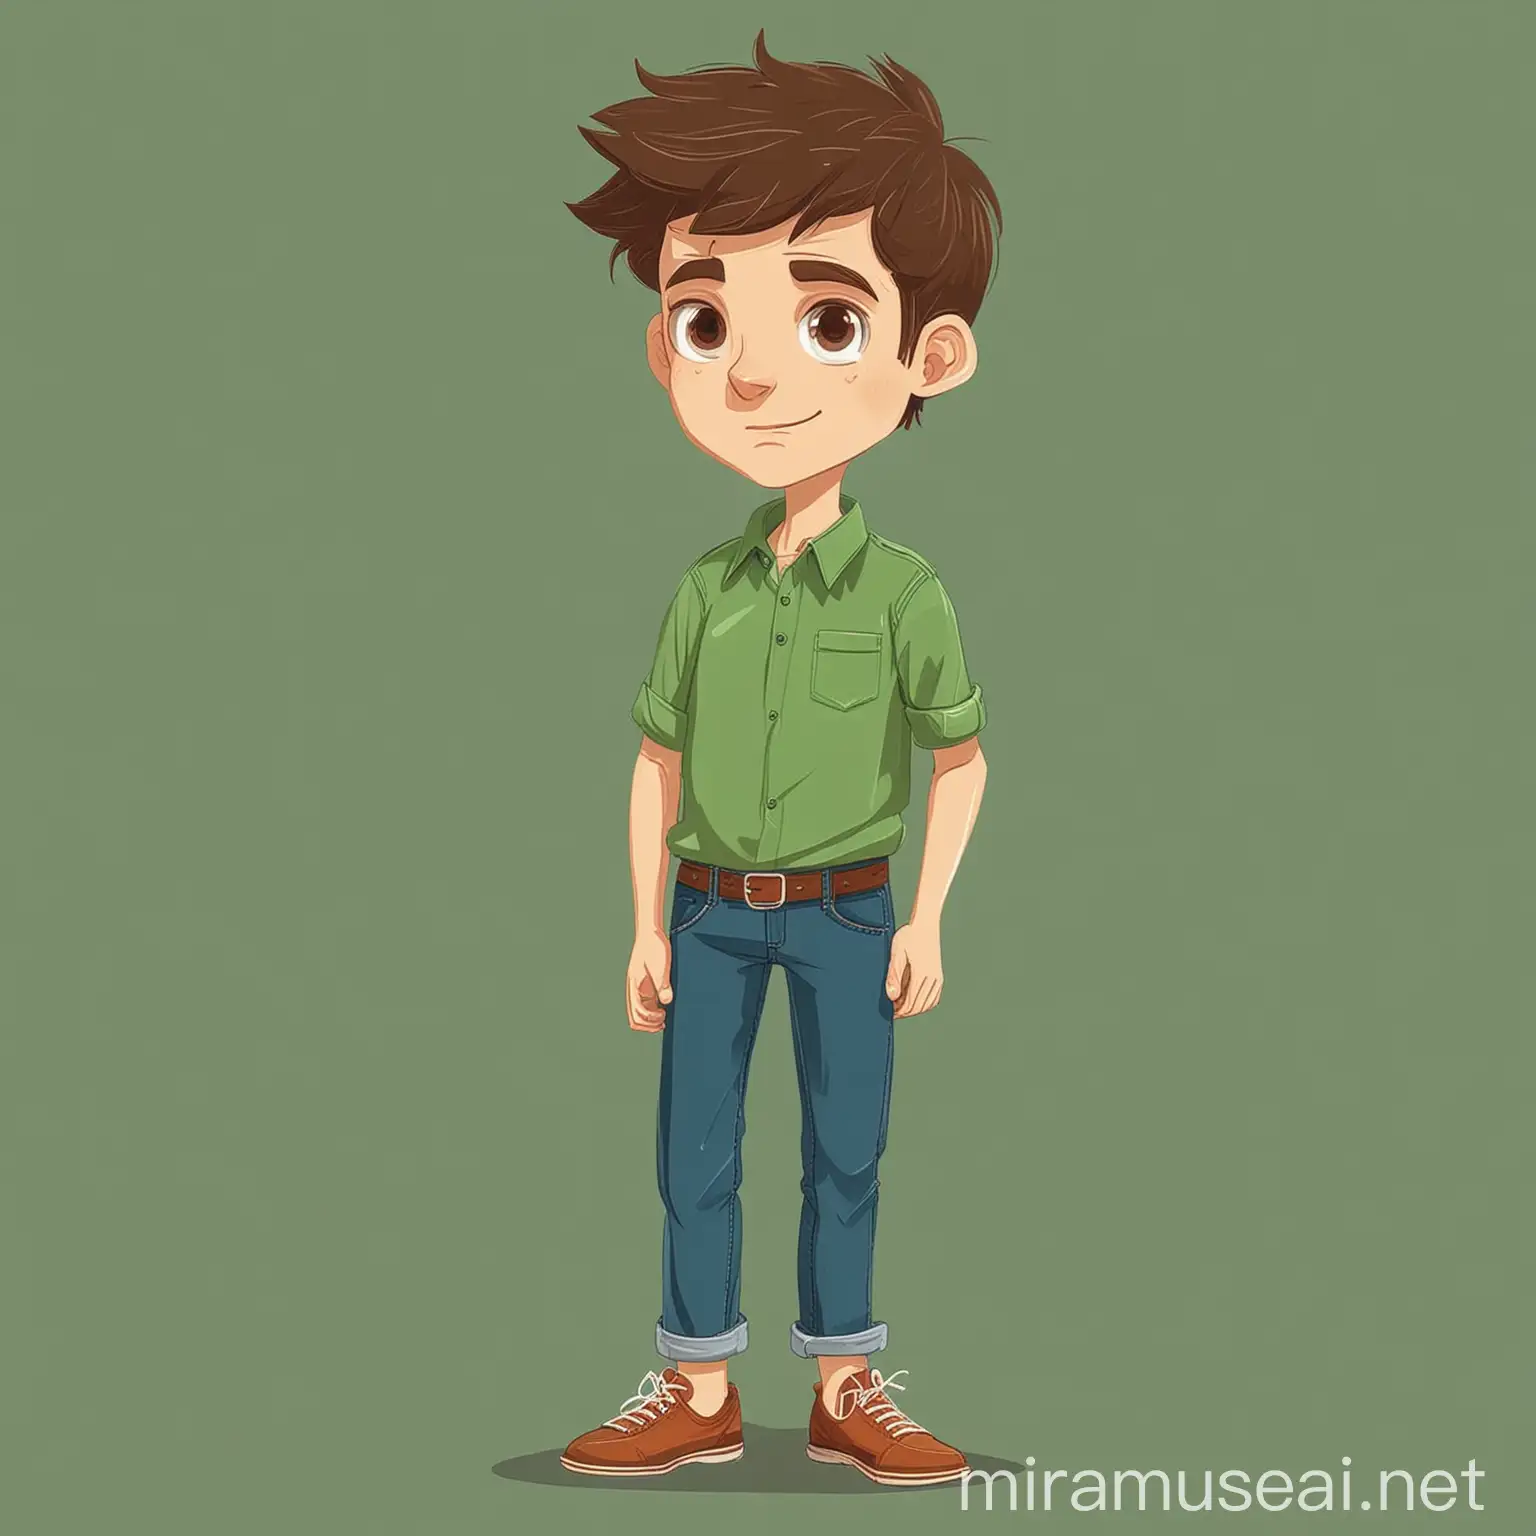 Draw a boy in a green shirt in flat vector style